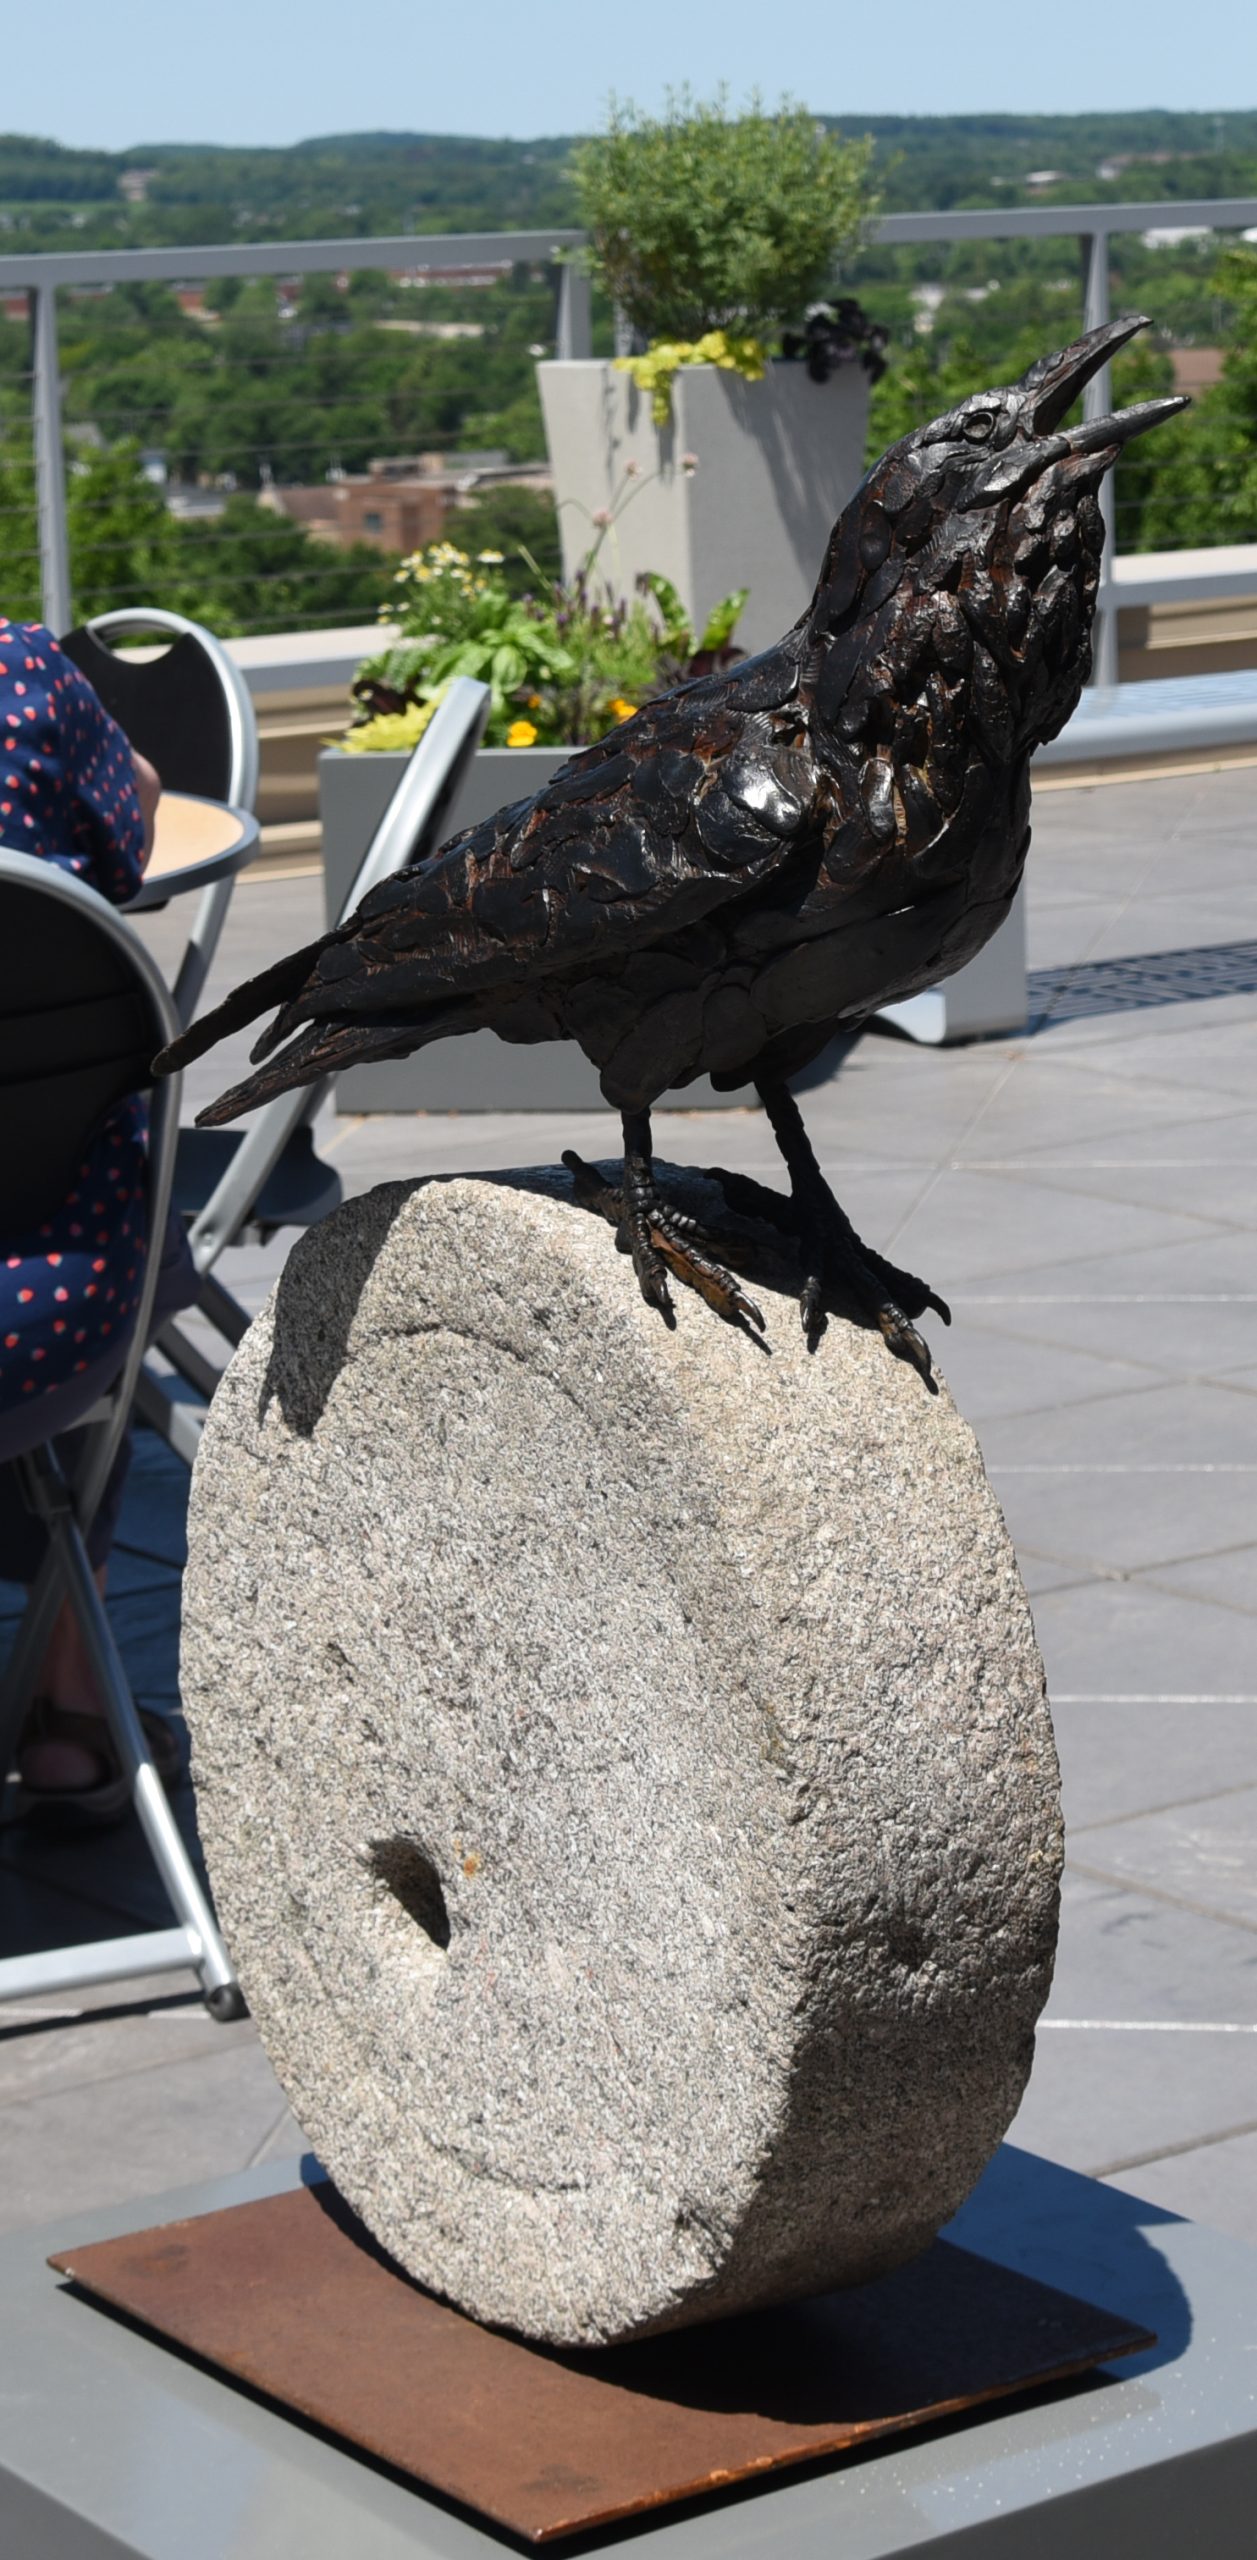 A dark brown bronze sculpture of a raven with head raised and beak open stands atop a circular stone.